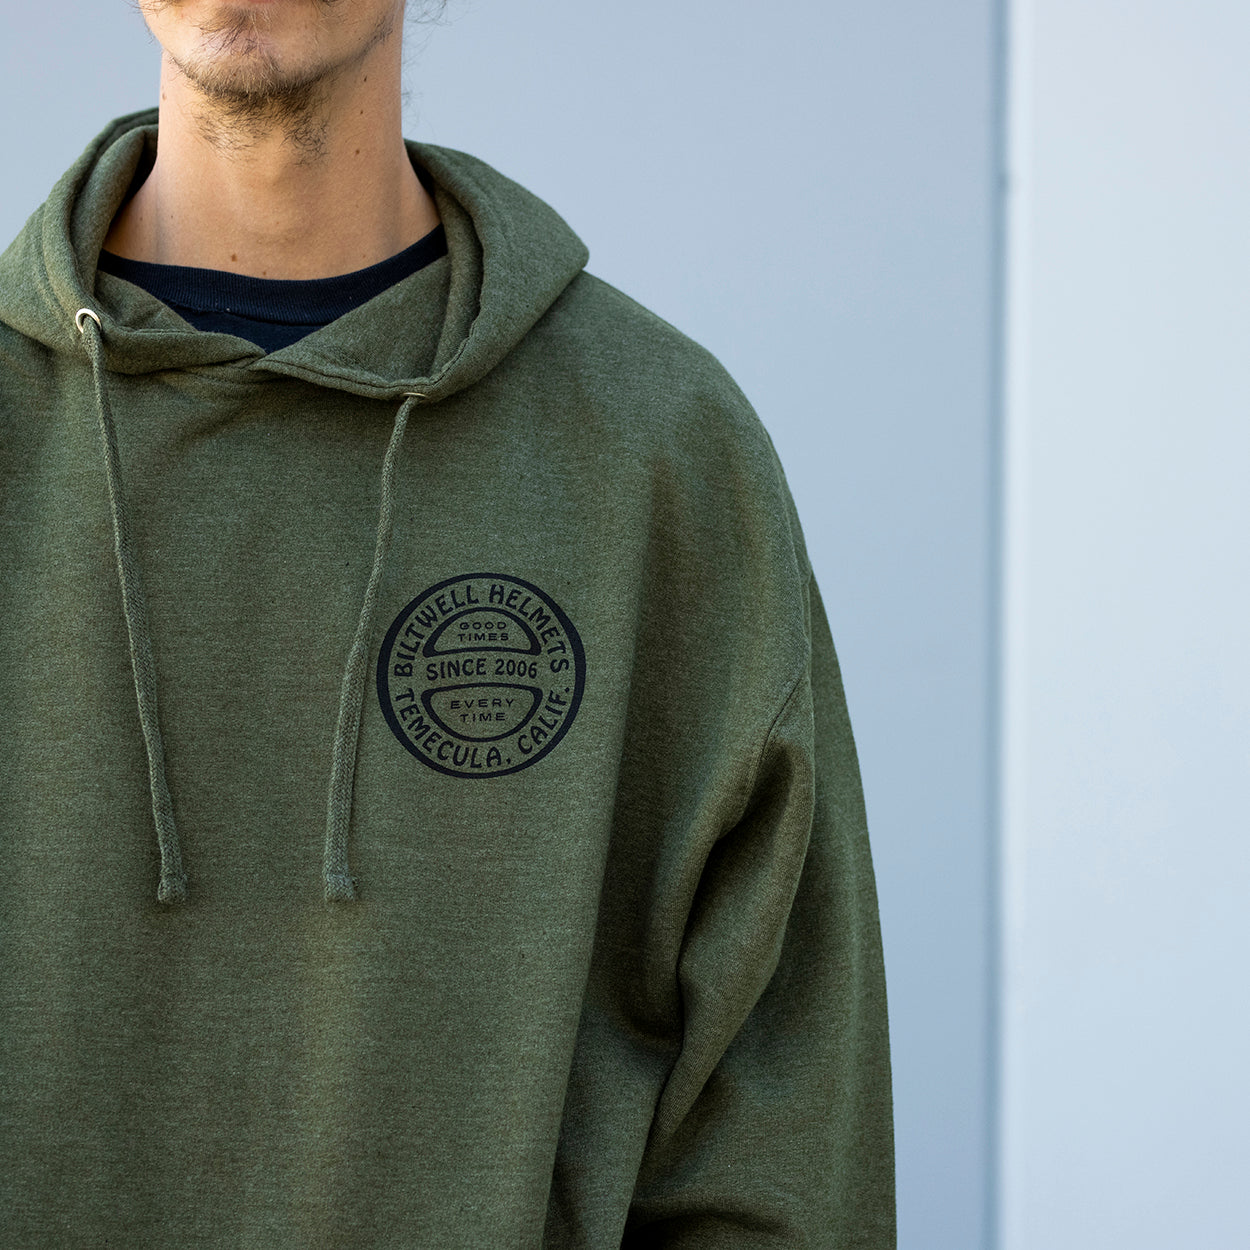 Since 2006 Pullover Hoodie